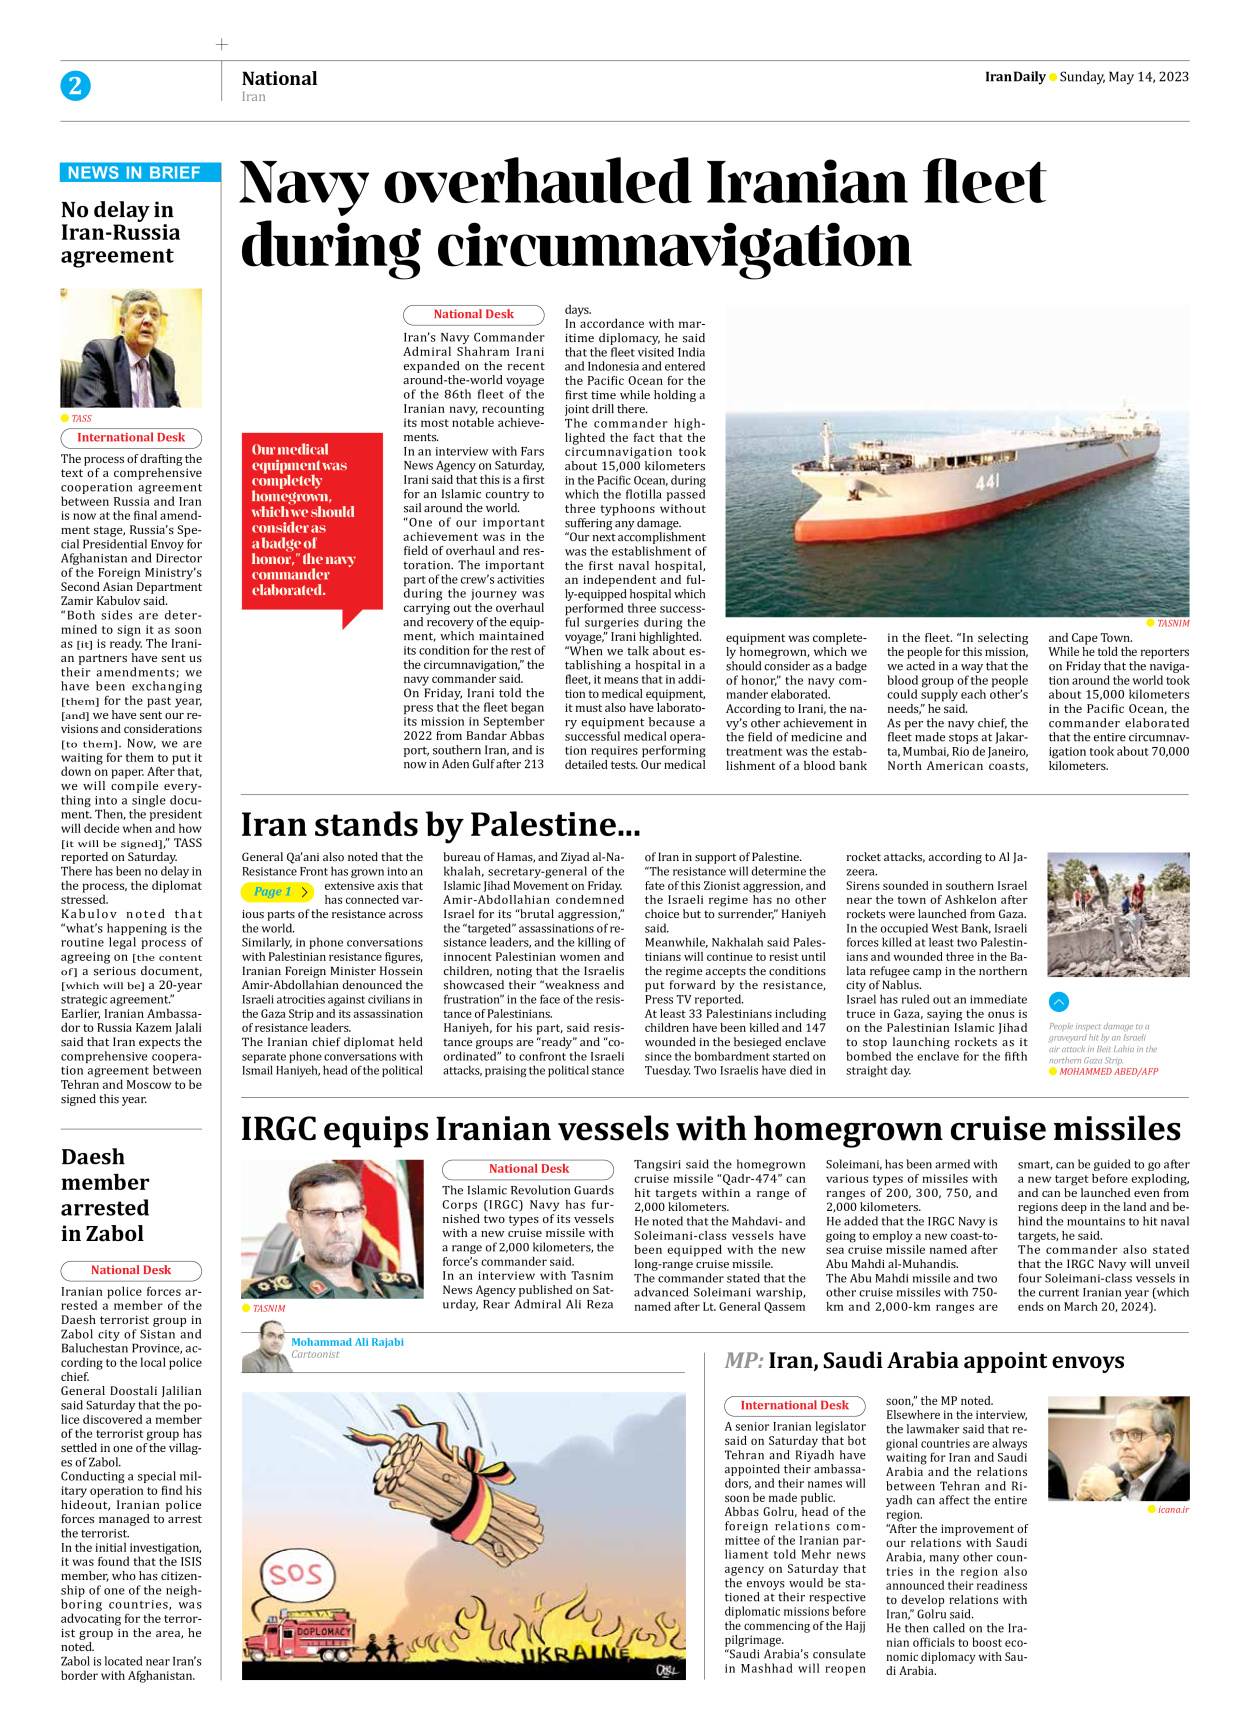 Iran Daily - Number Seven Thousand Two Hundred and Ninety One - 14 May 2023 - Page 2